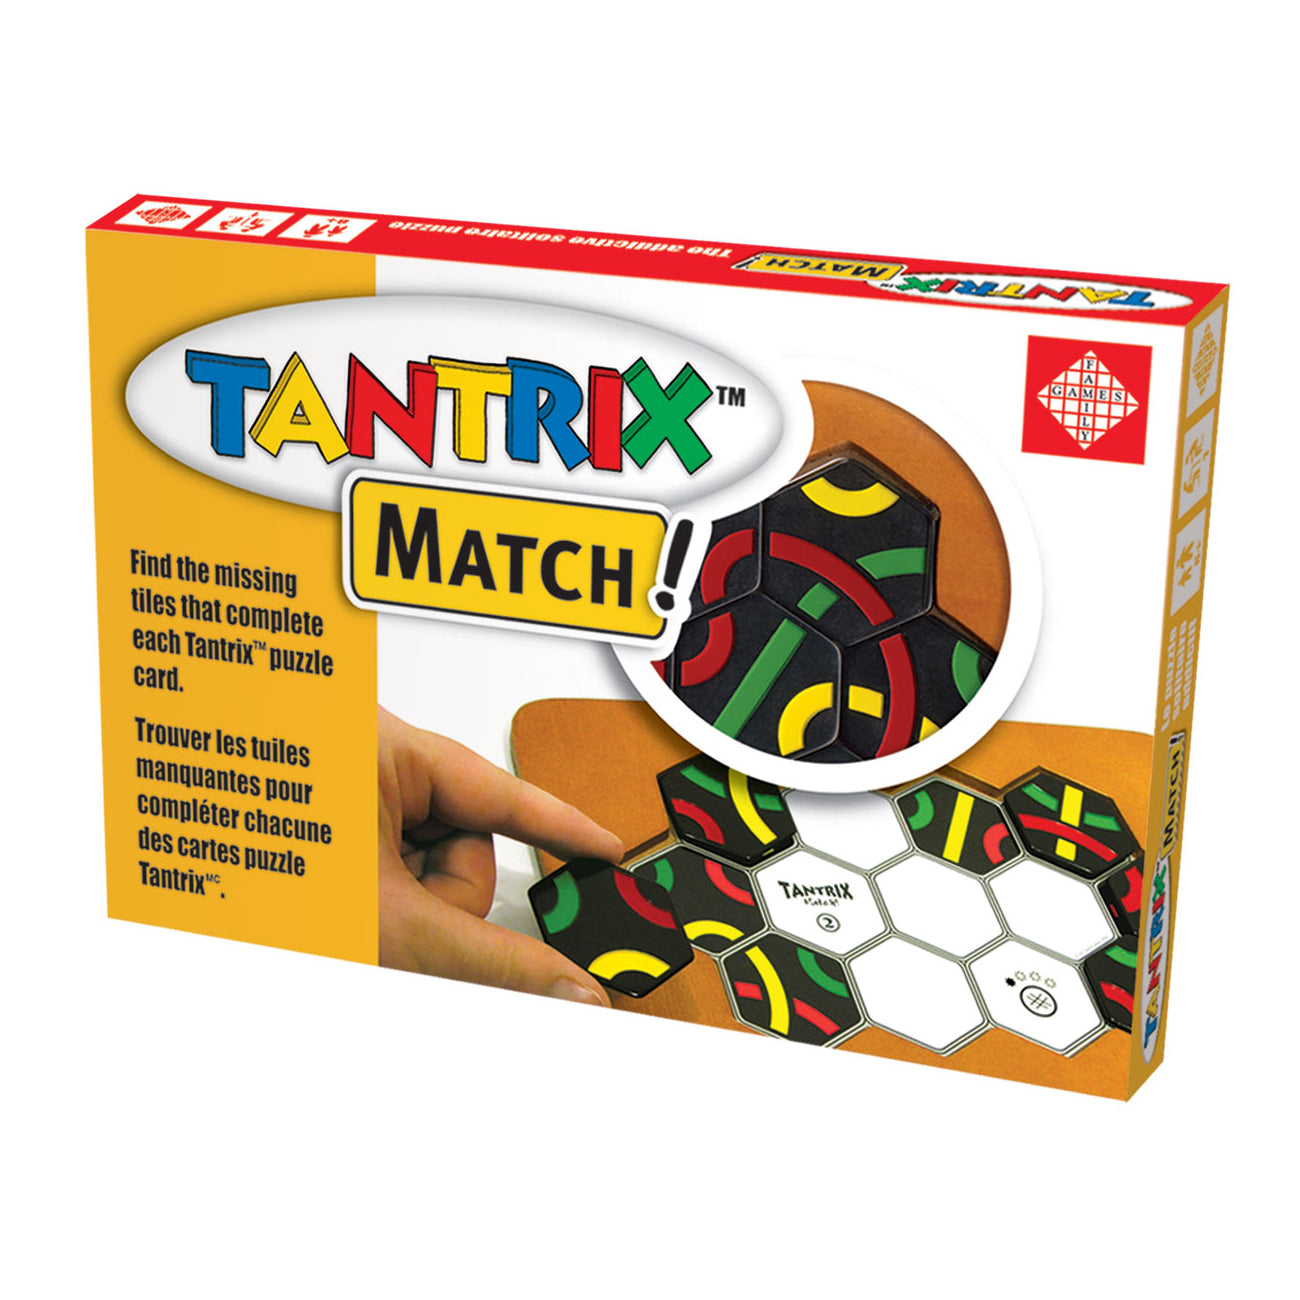  What is Tantrix?